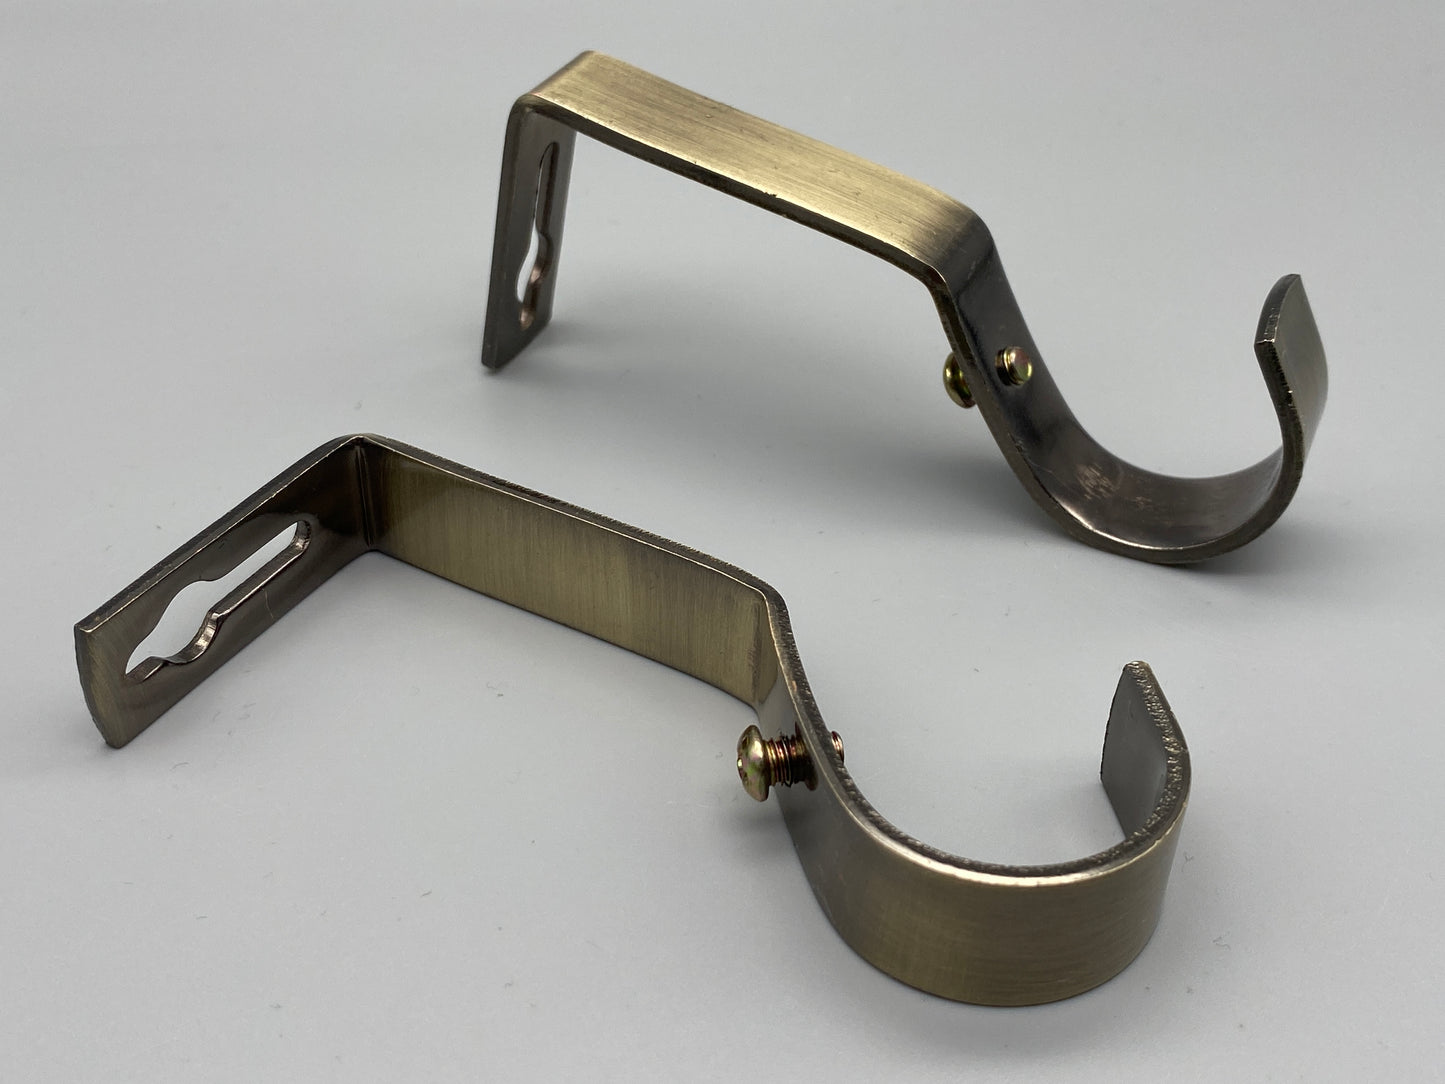 Pair of Heavy Duty Metal Curtain Pole Brackets - Holds Rods upto 30mm - Wall Brackets Holder (Antique Gold)